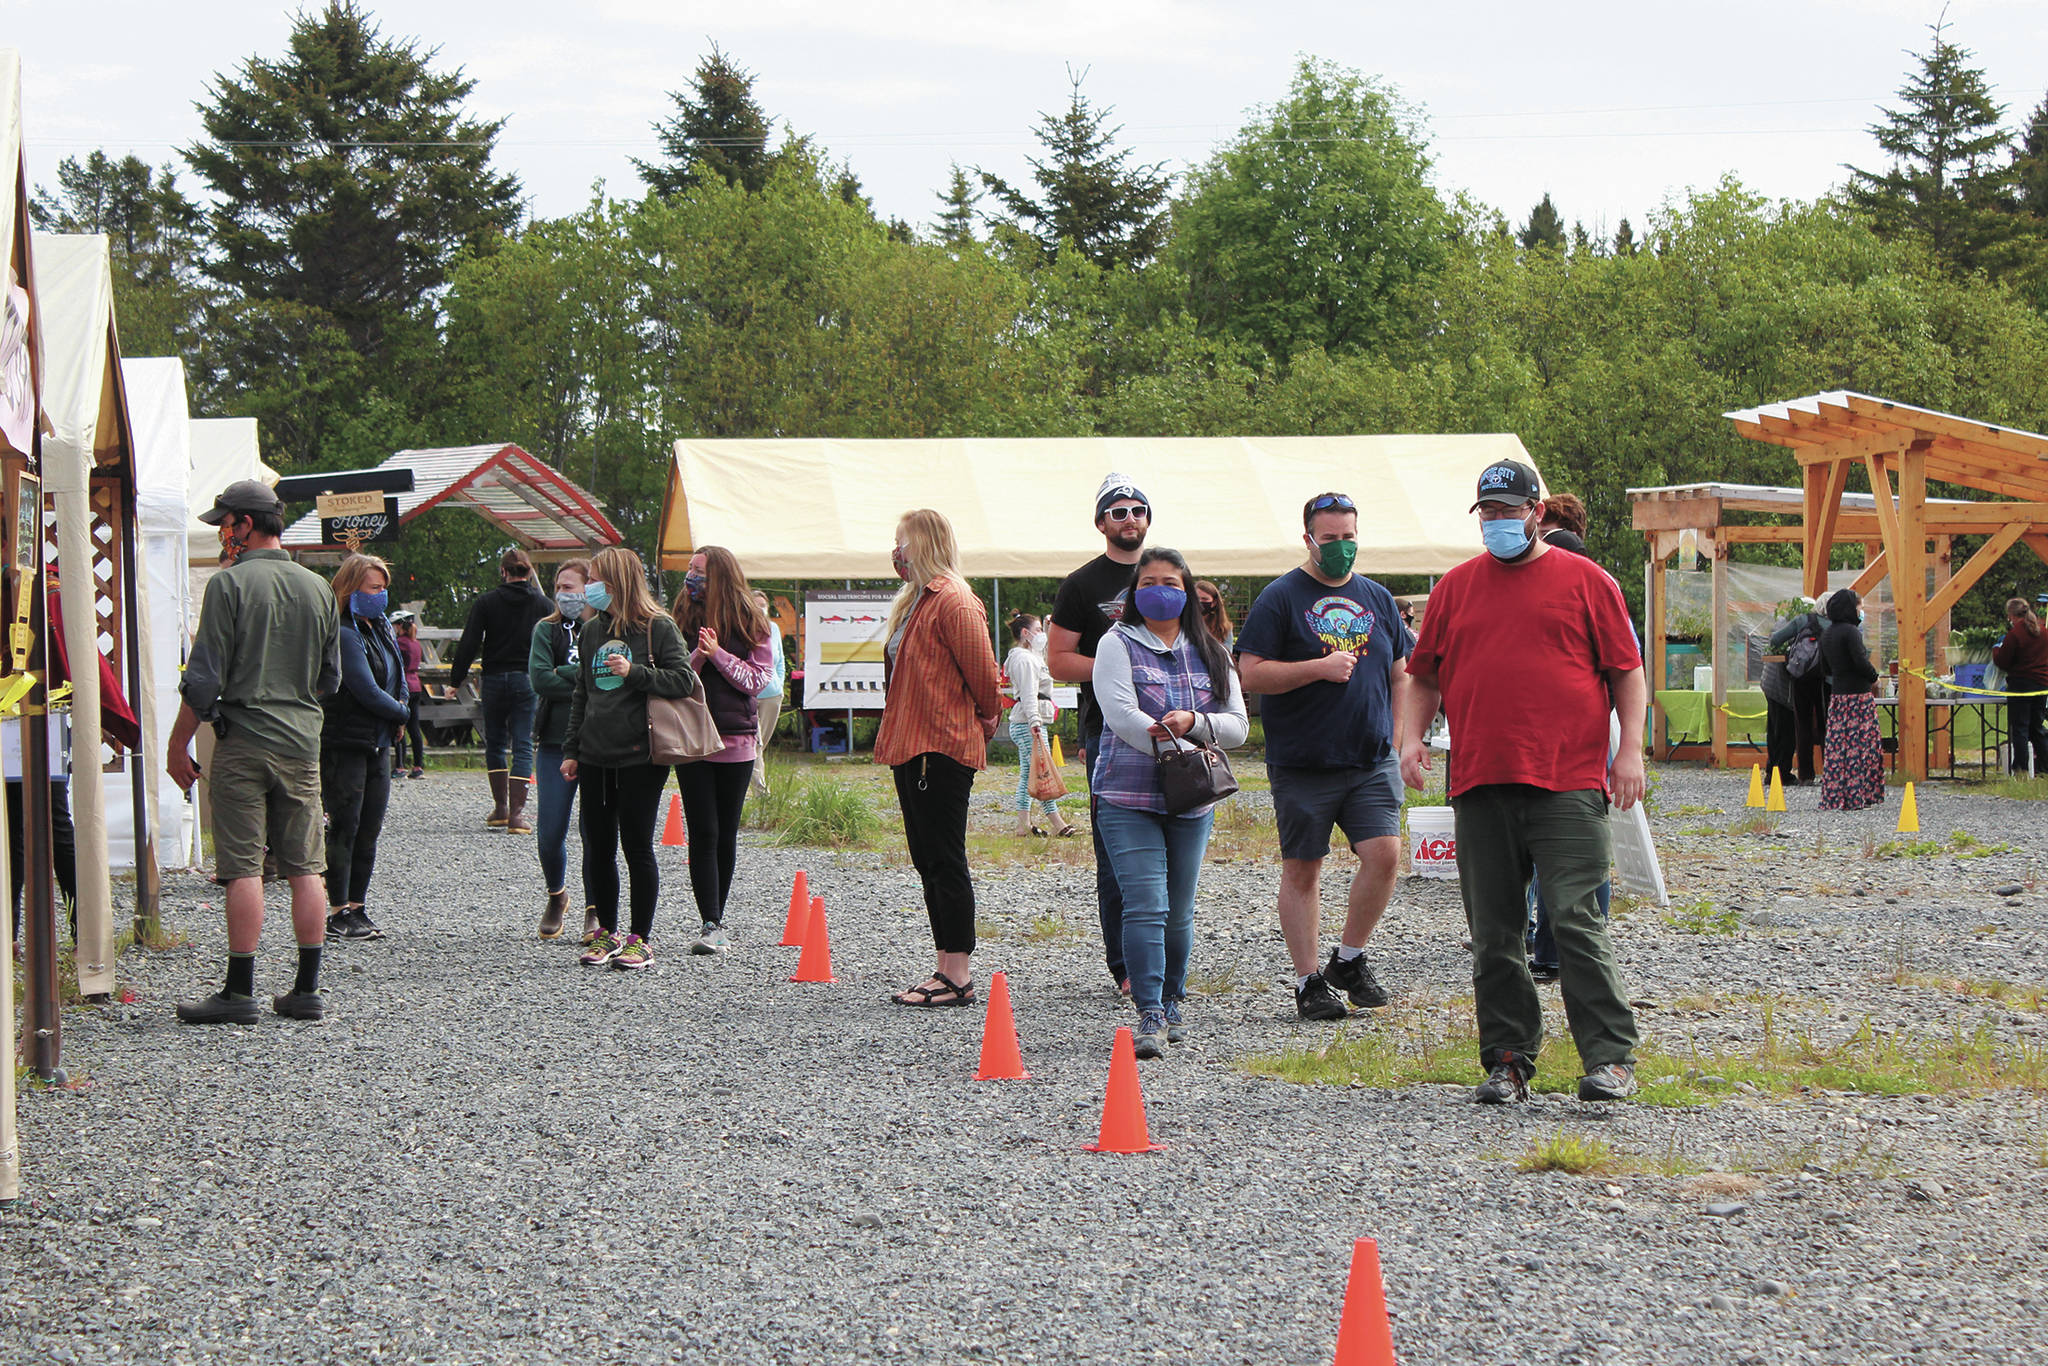 People walk through a pared down version of the Homer Farmers Market on Saturday, May 30, 2020 in Homer, Alaska. (Photo by Megan Pacer/Homer News)